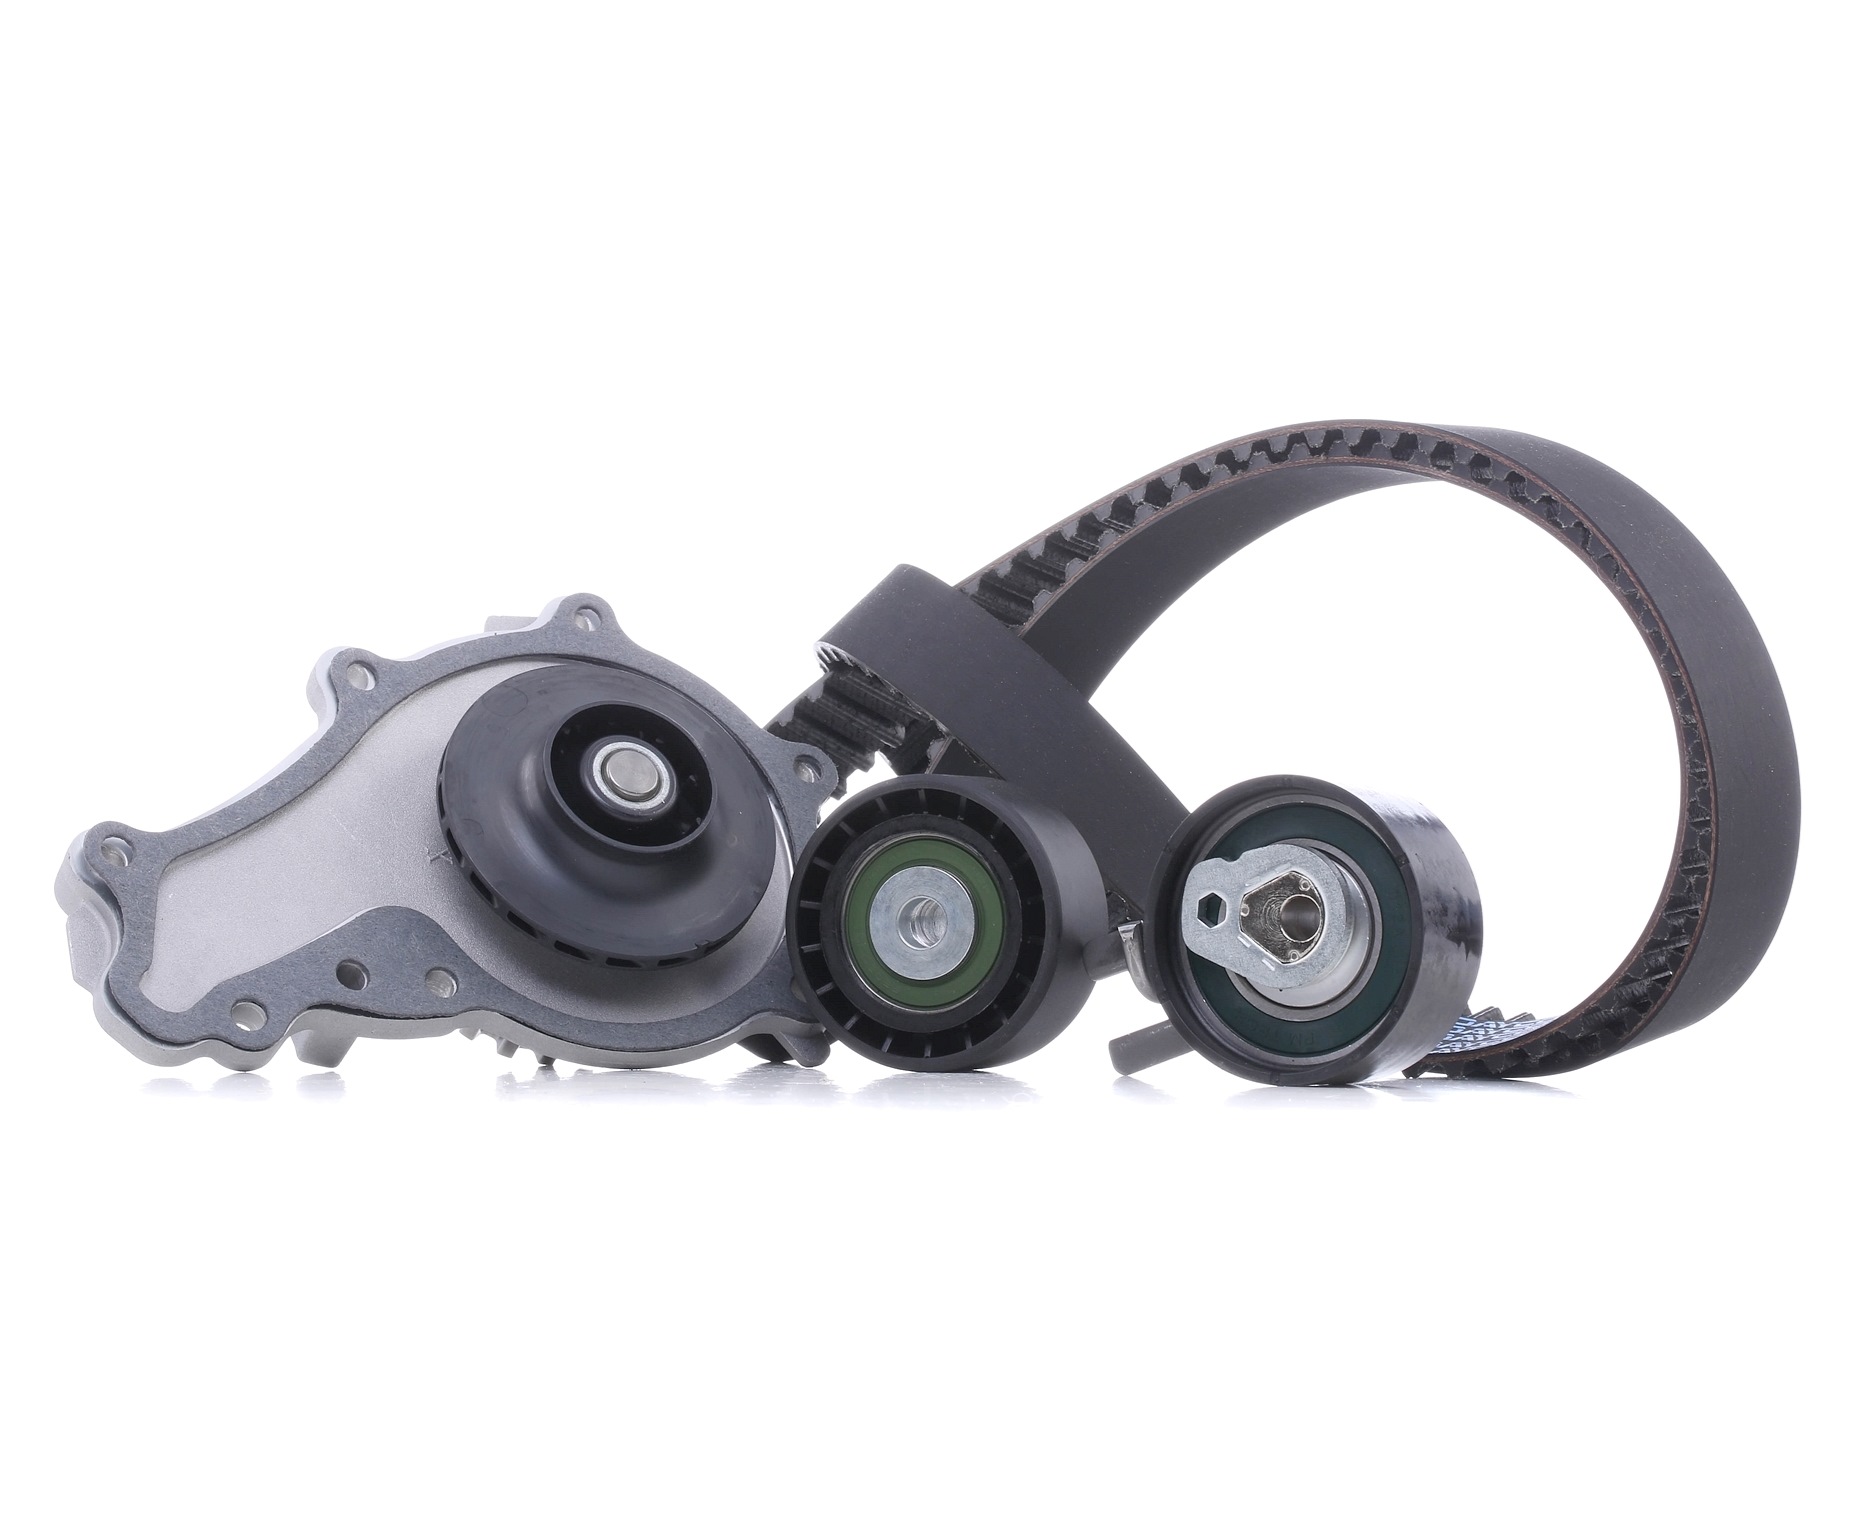 MAGNETI MARELLI 132011160063 Water pump and timing belt kit Number of Teeth: 137 L: 1305 mm, Width: 25 mm